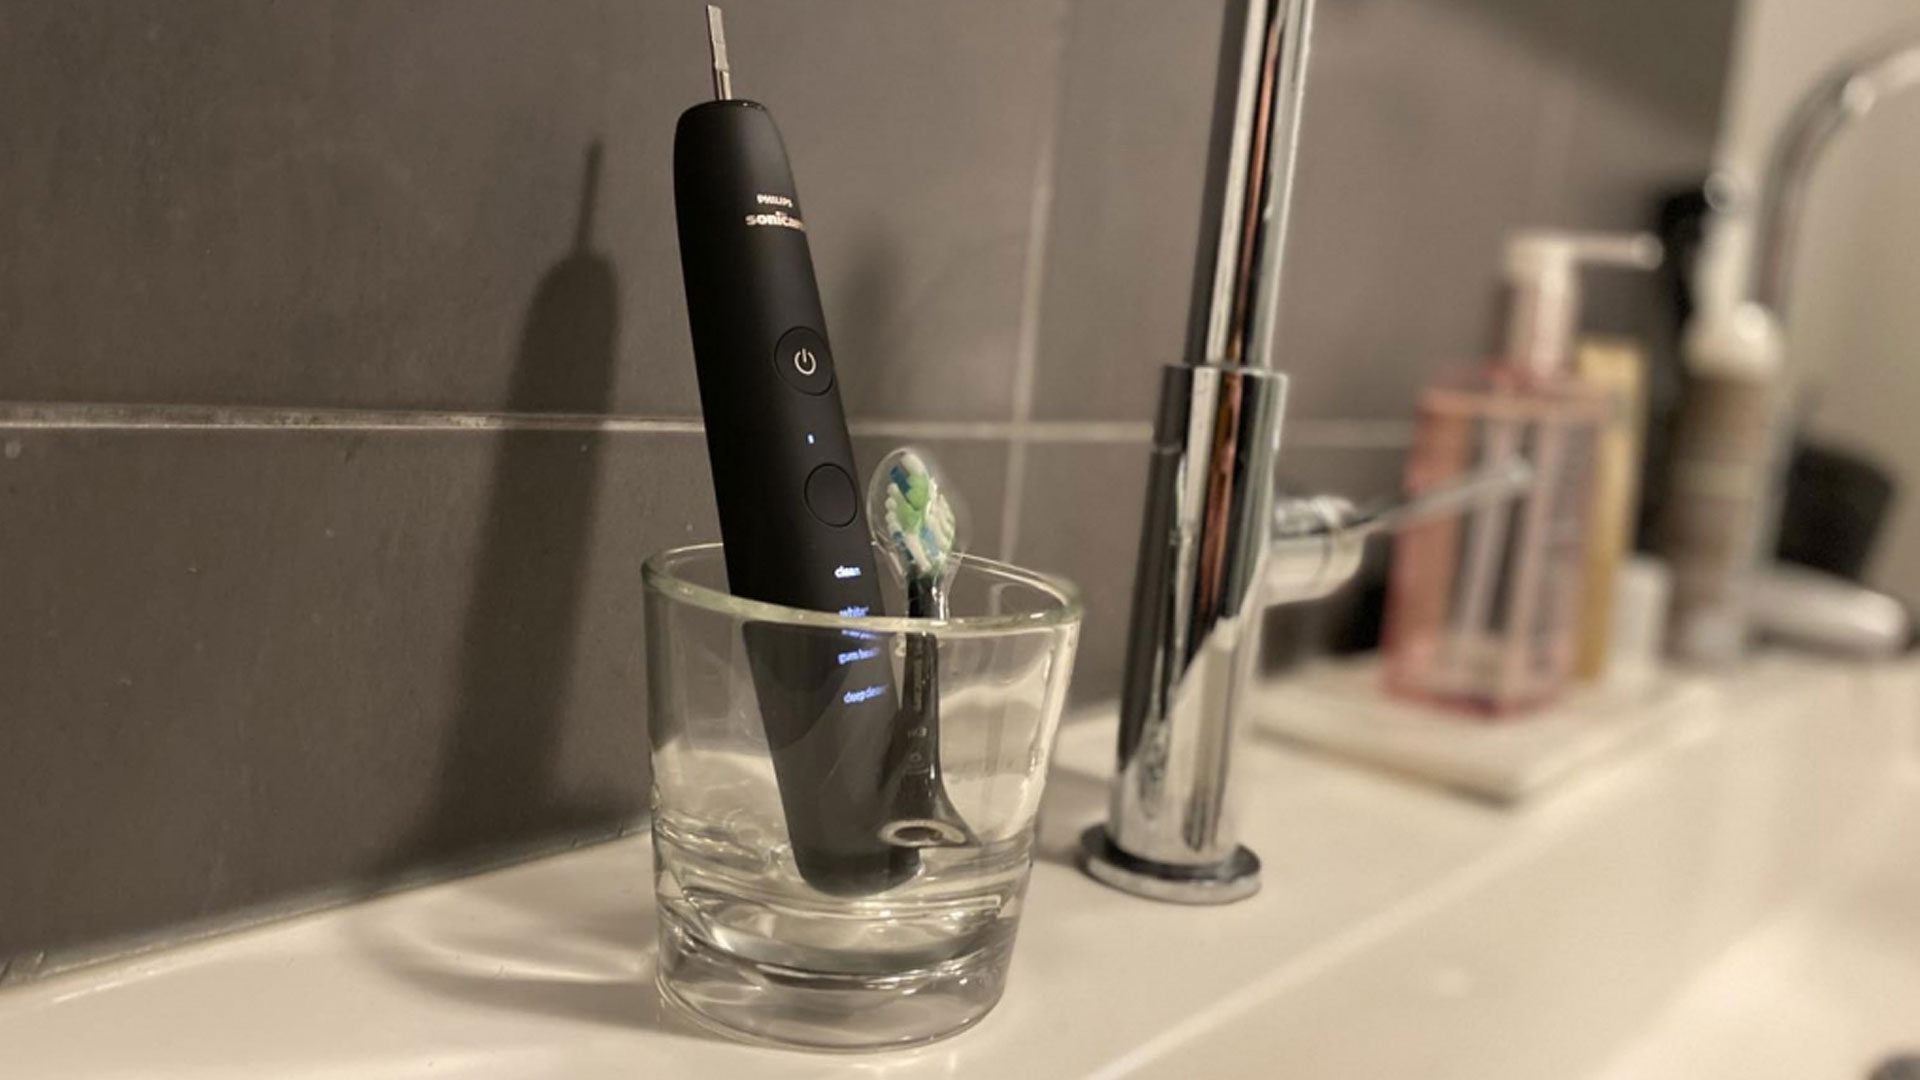 Spectaculair In zicht Schots Review: Philips Sonicare DiamondClean 9000 (HX9911) | FWD